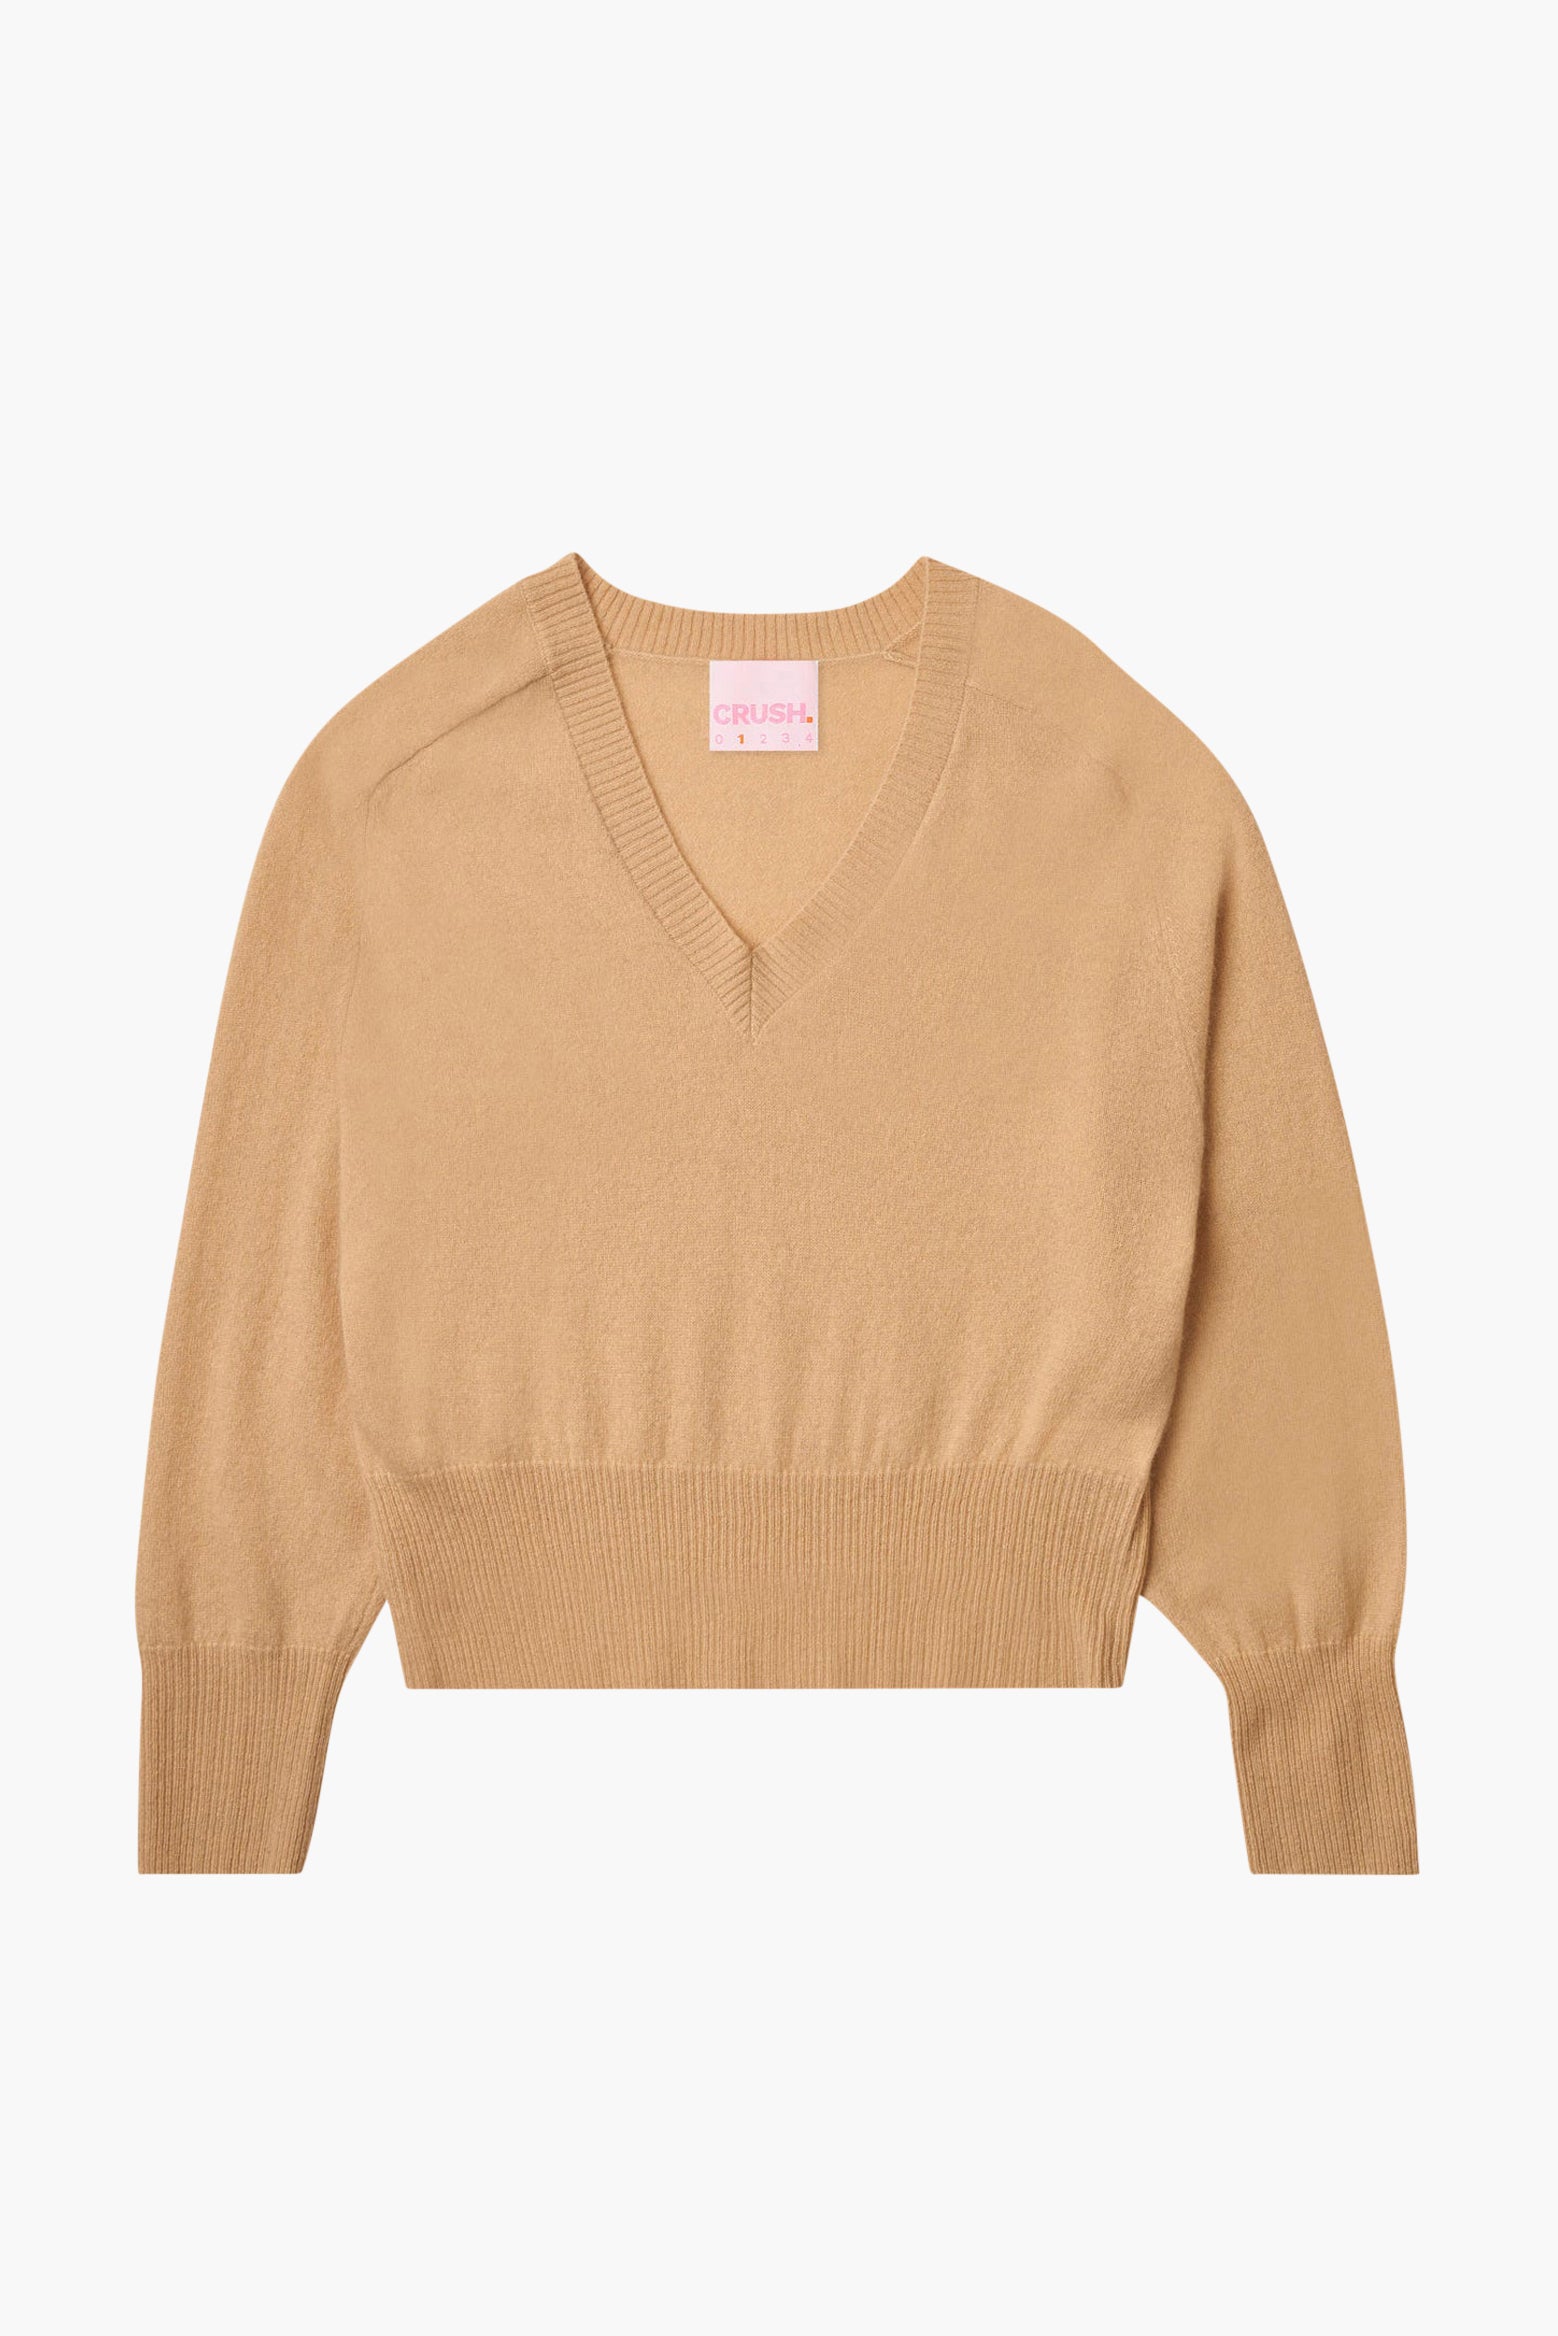 Crush Cashmere Billie V Neck in Soft Camel available at TNT The New Trend Australia. Free shipping on orders over $300 AUD.